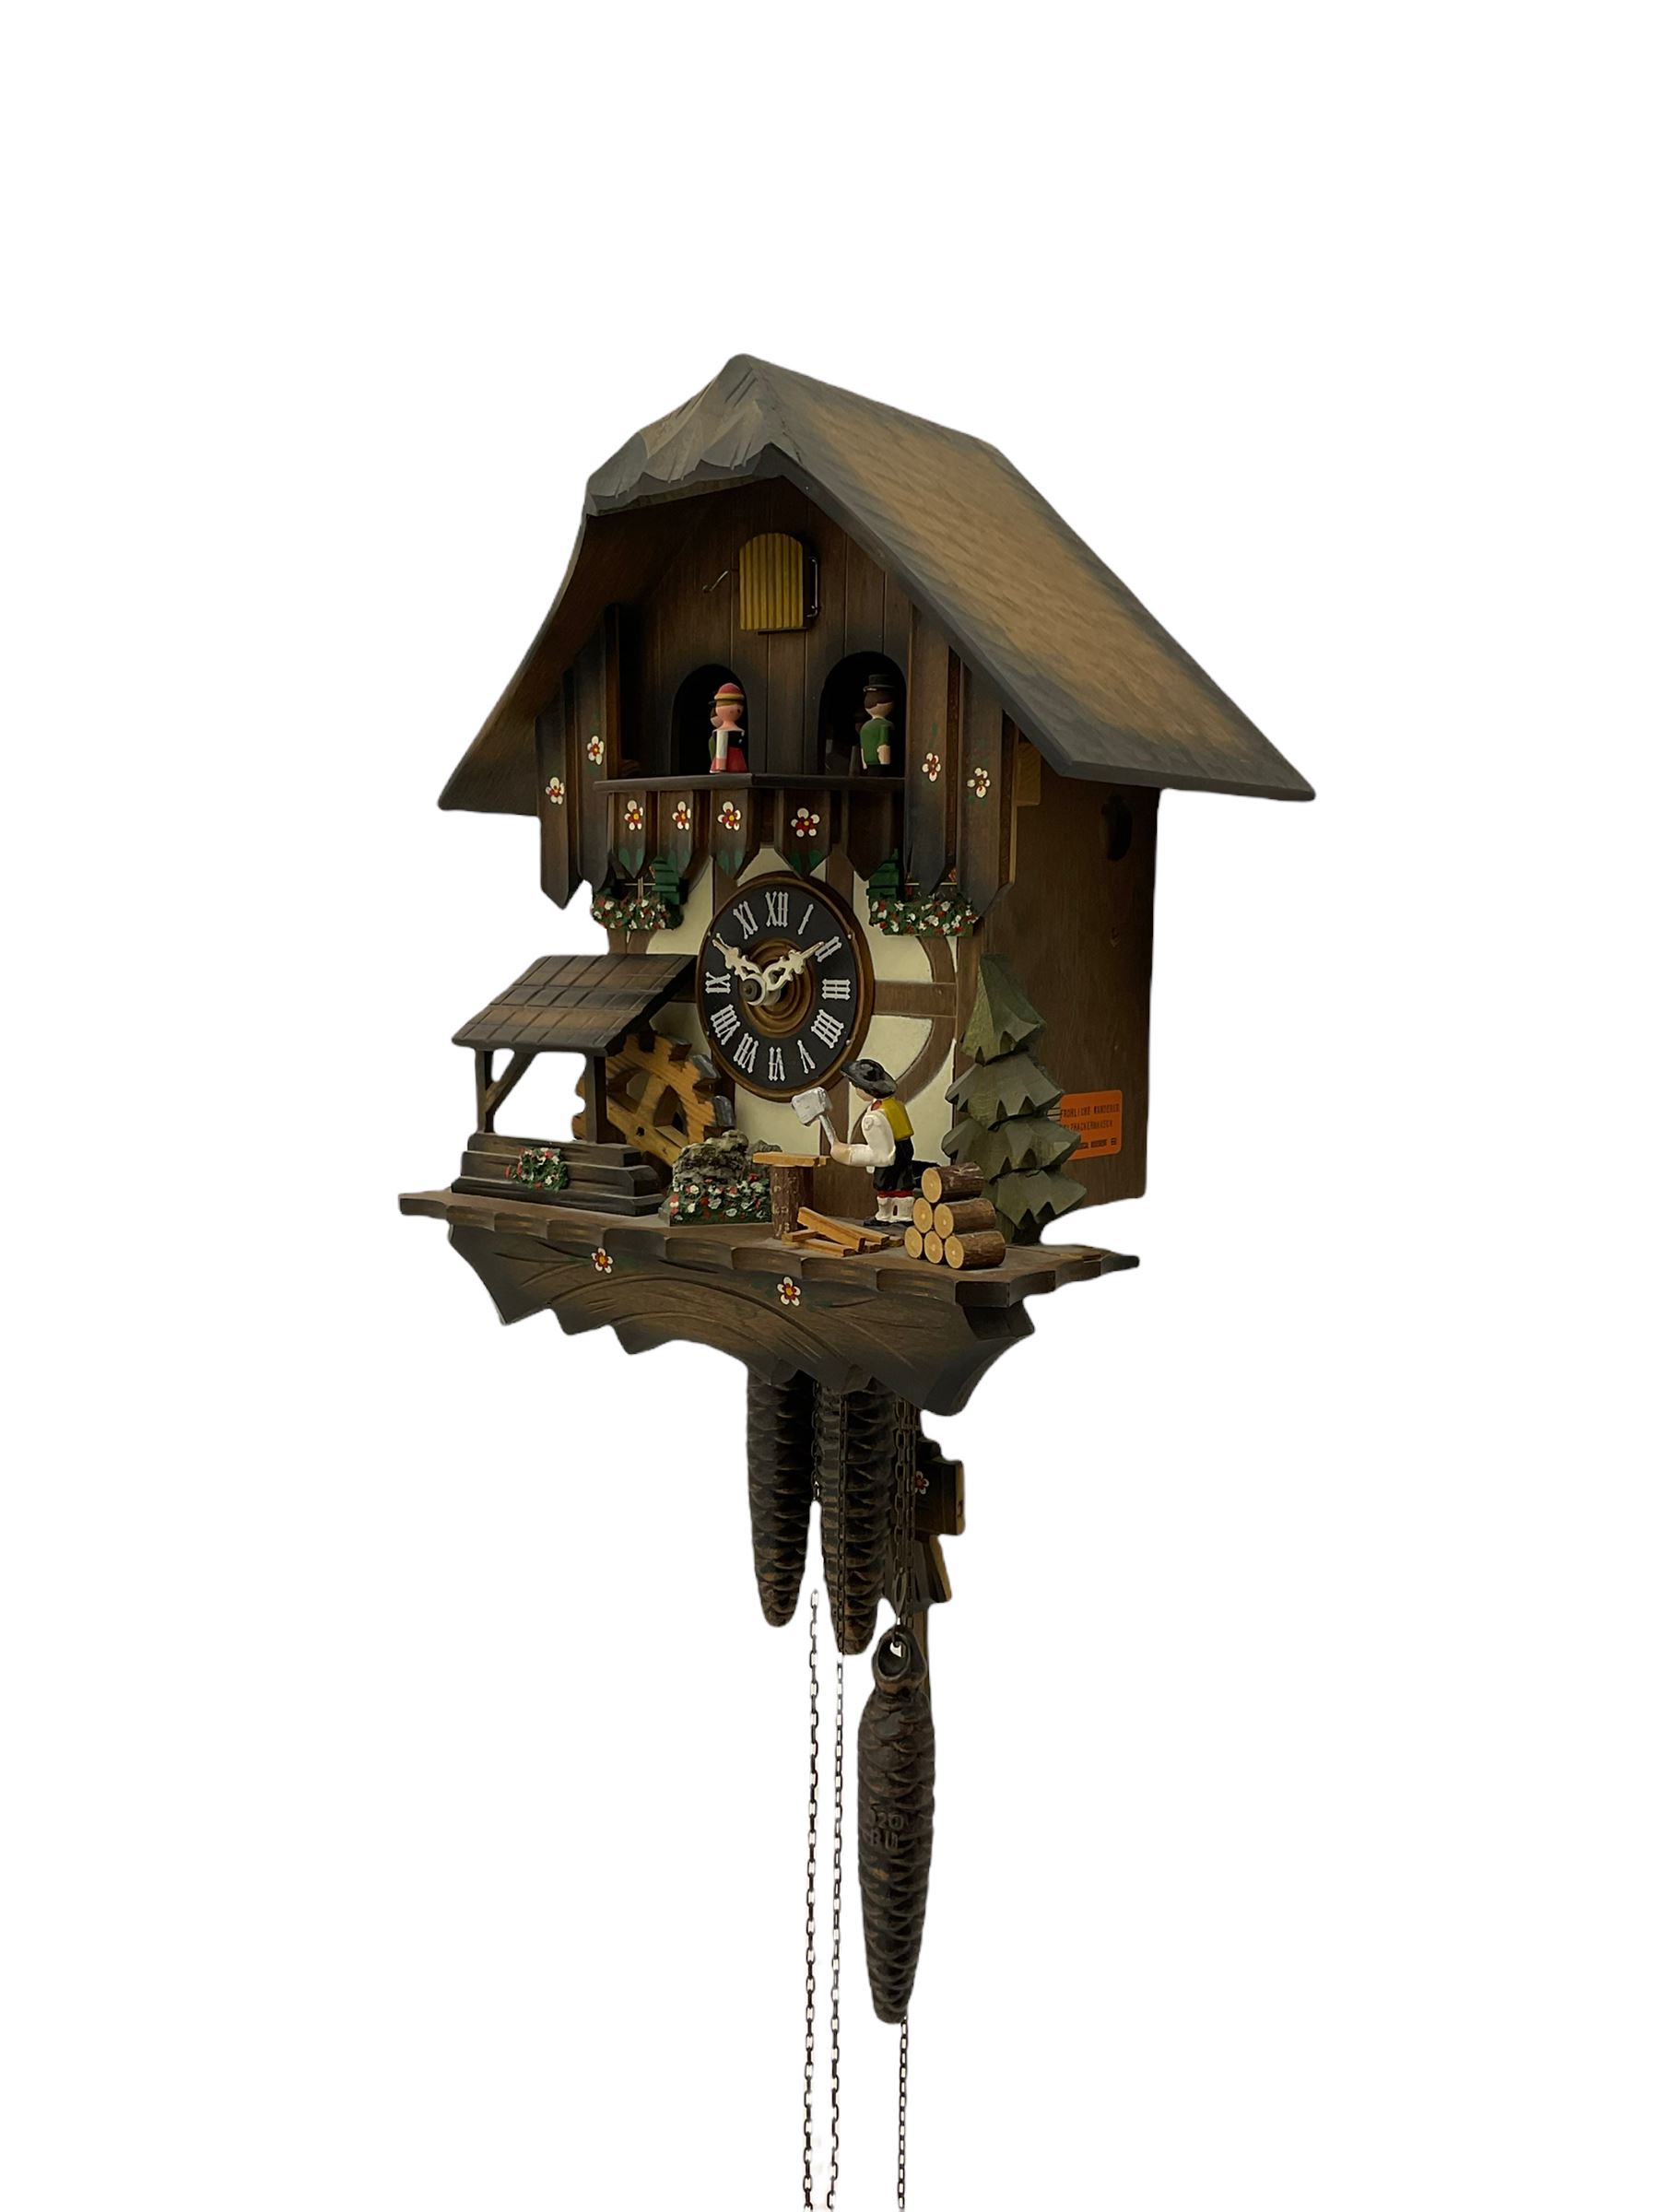 A 20th century West German 30-hour Automaton musical cuckoo clock with a Swiss musical movement play - Image 2 of 3